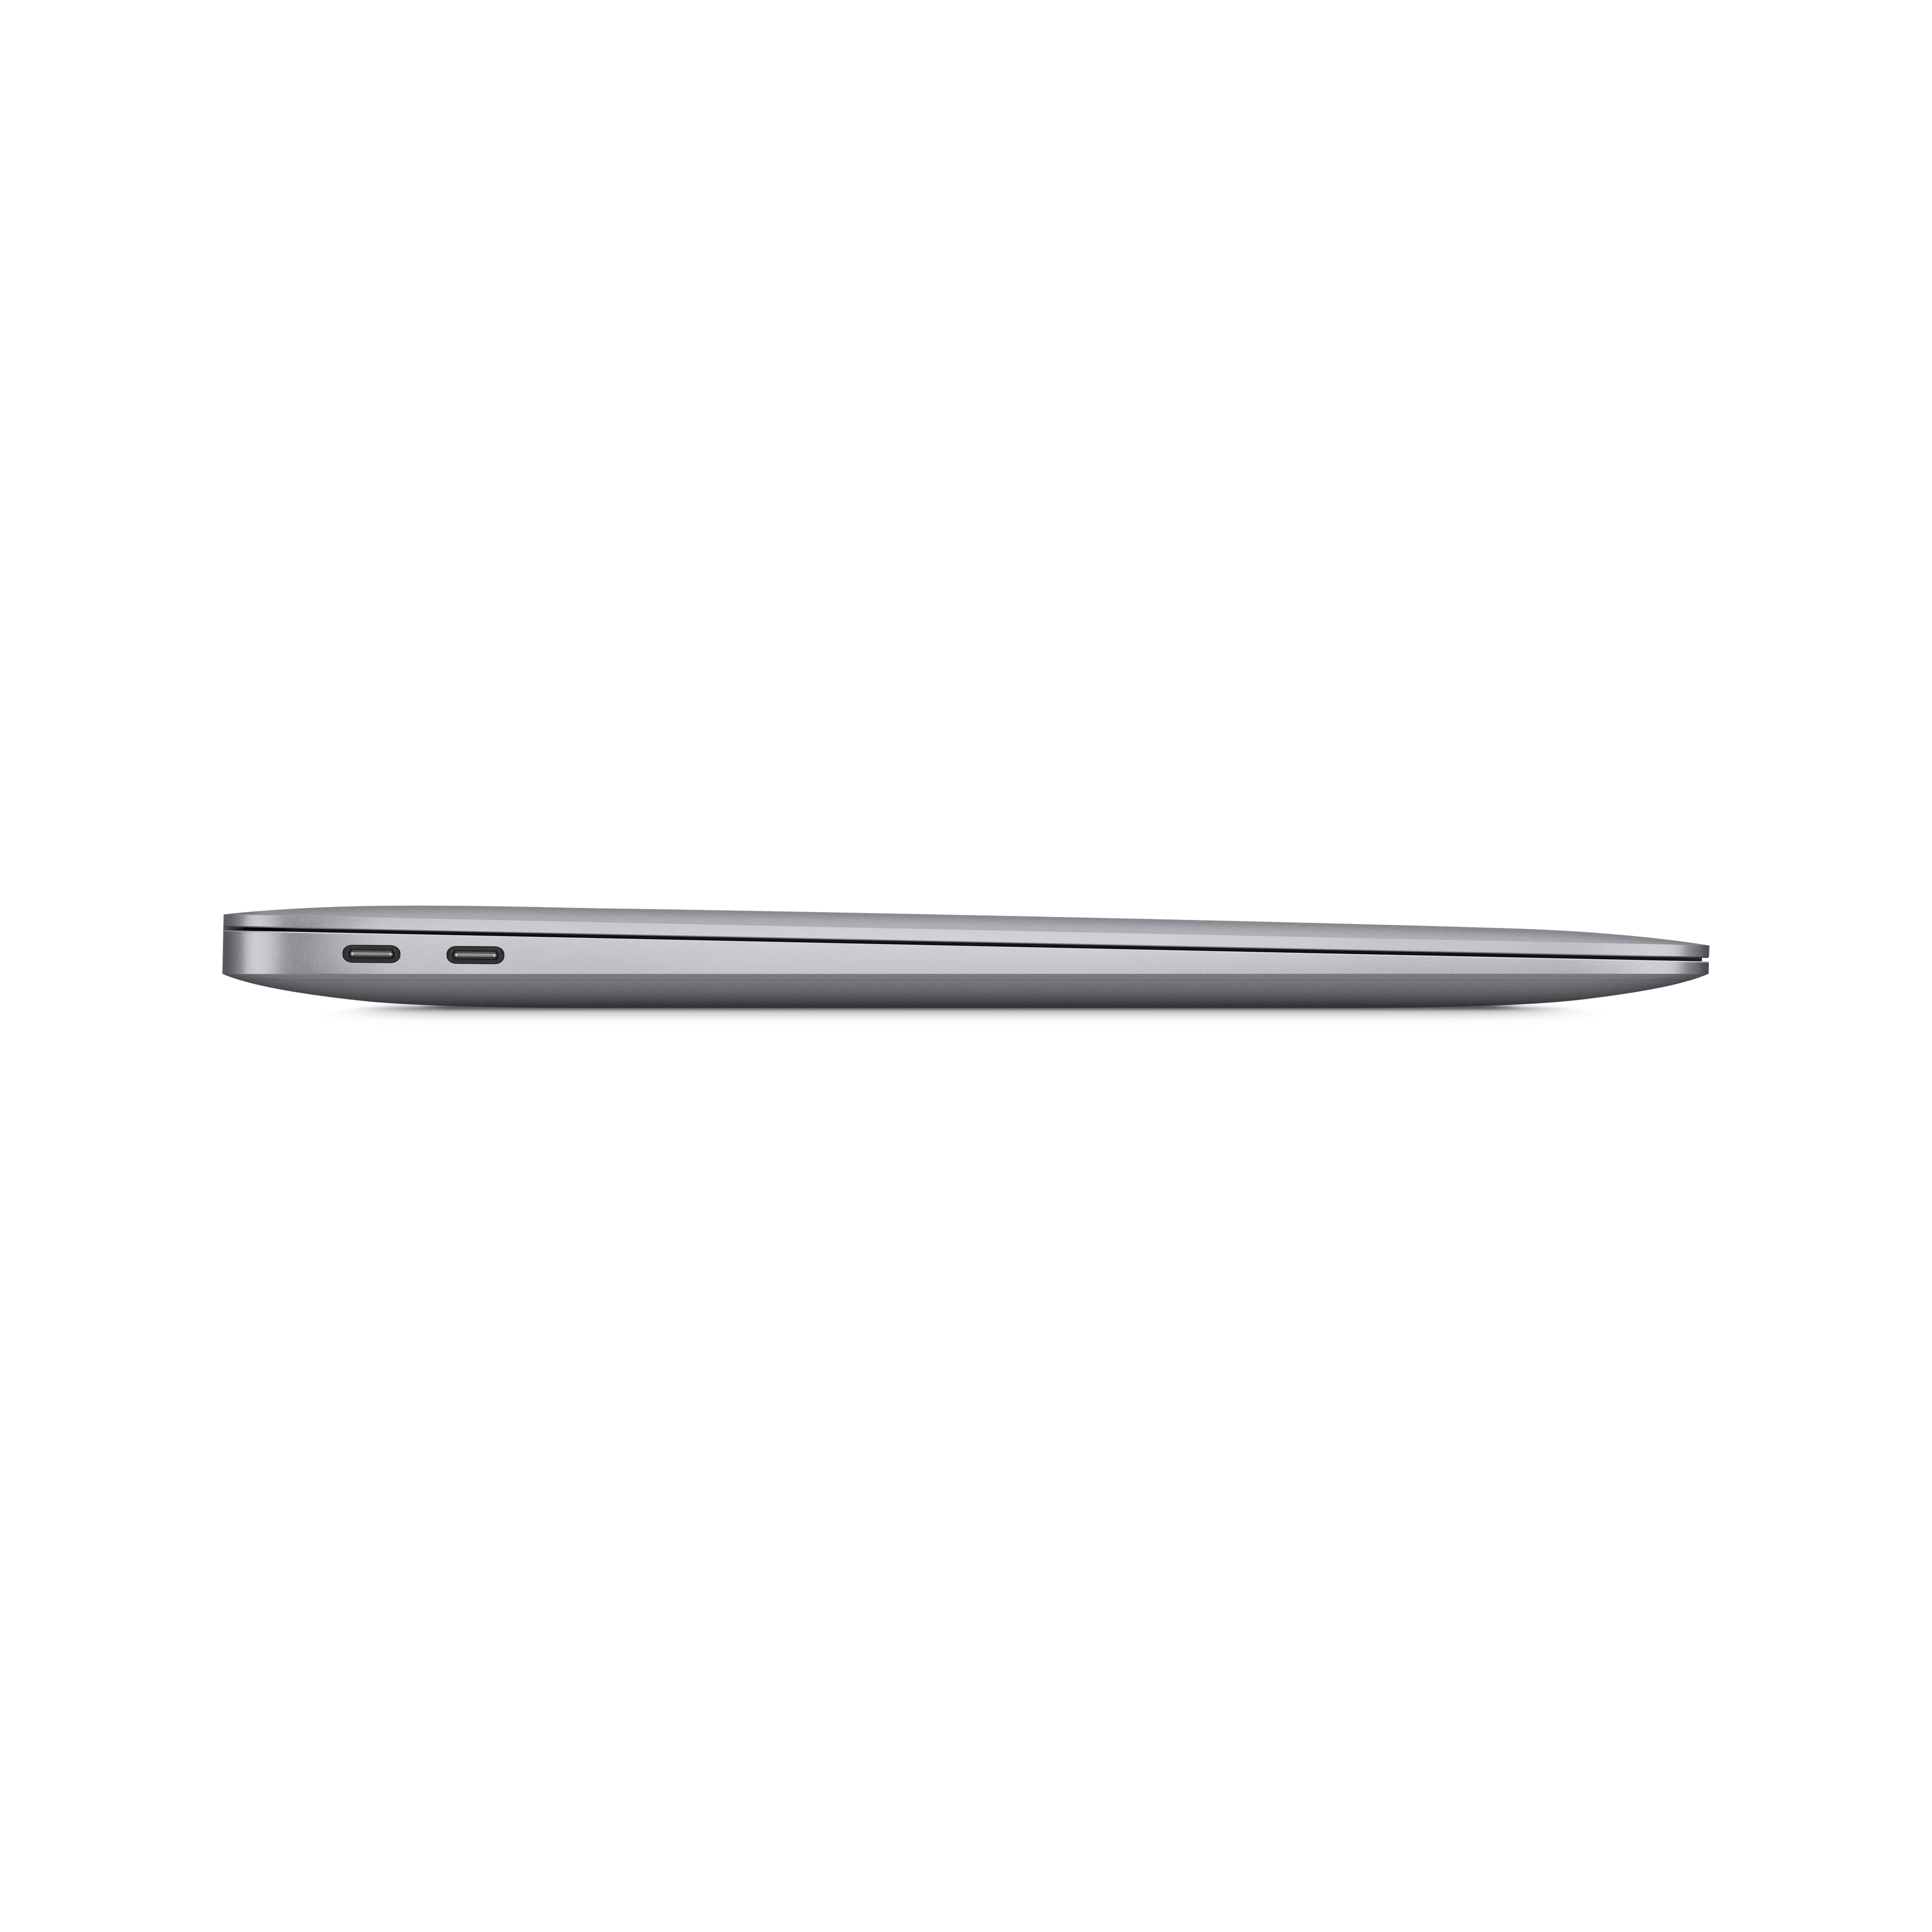 Pre-Owned 13-inch MacBook Air M1 16GB / 256GB / Space Gray (2020